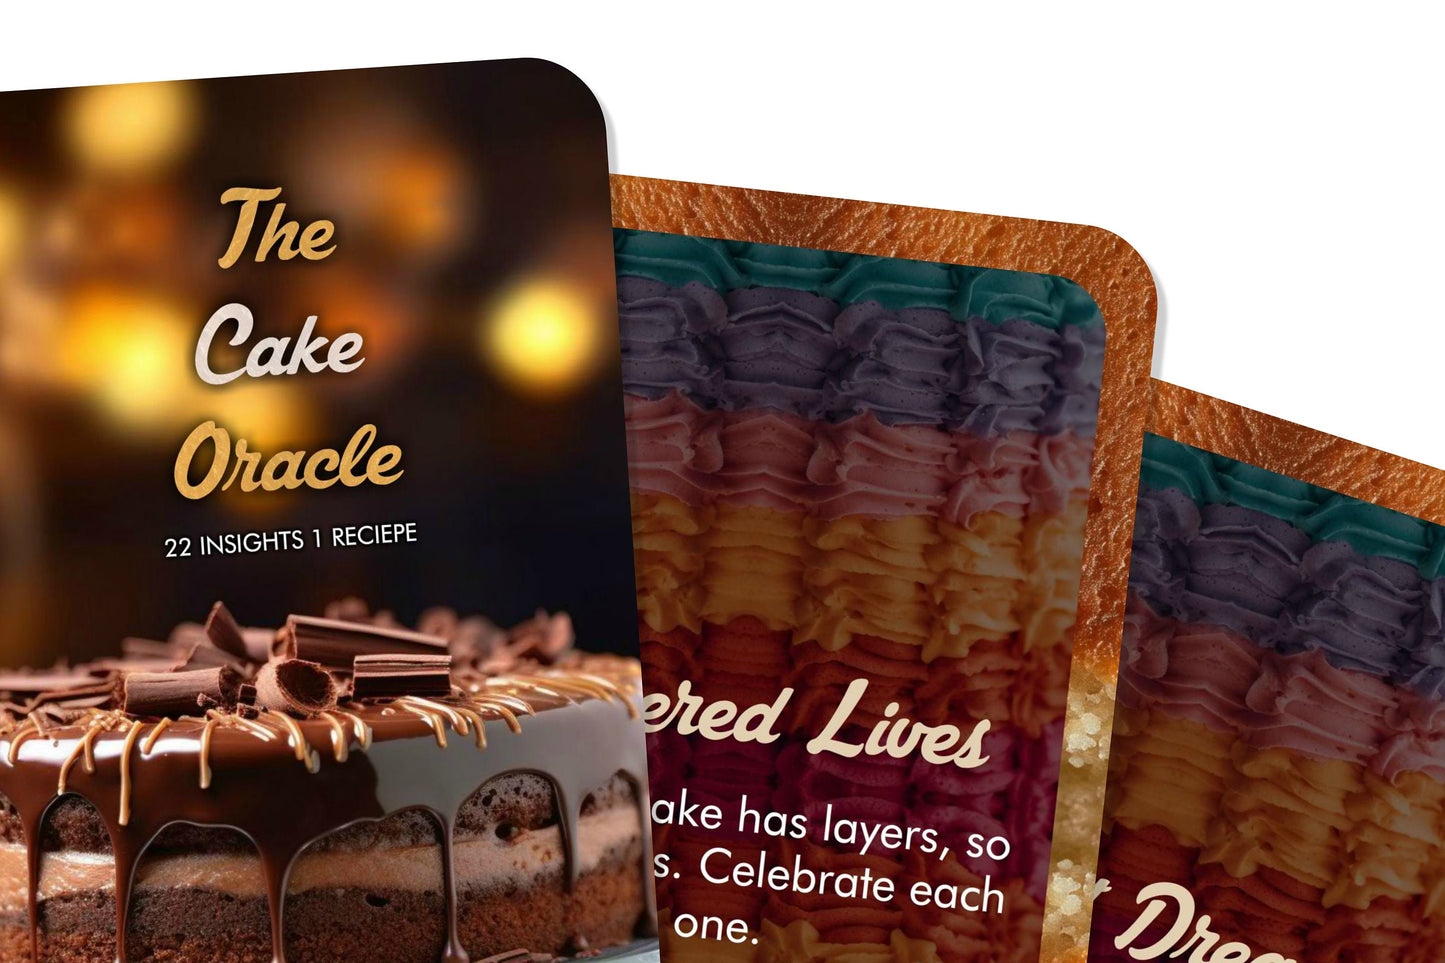 The Cake Oracle - Twenty Two insights and One recipe